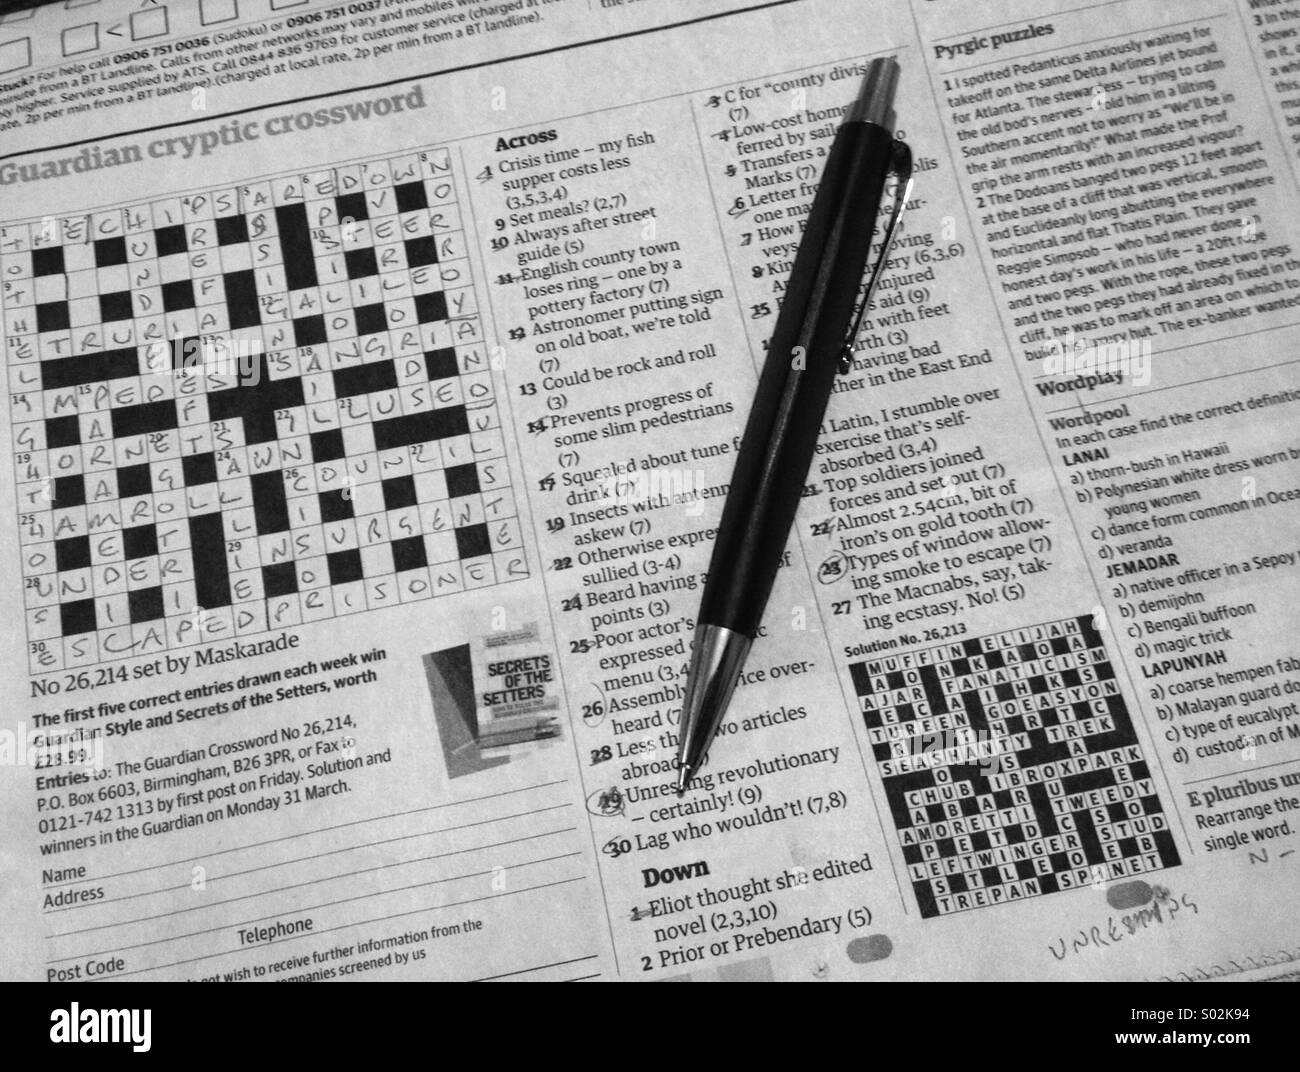 Completed Crossword Puzzle High Resolution Stock Photography And Images Alamy